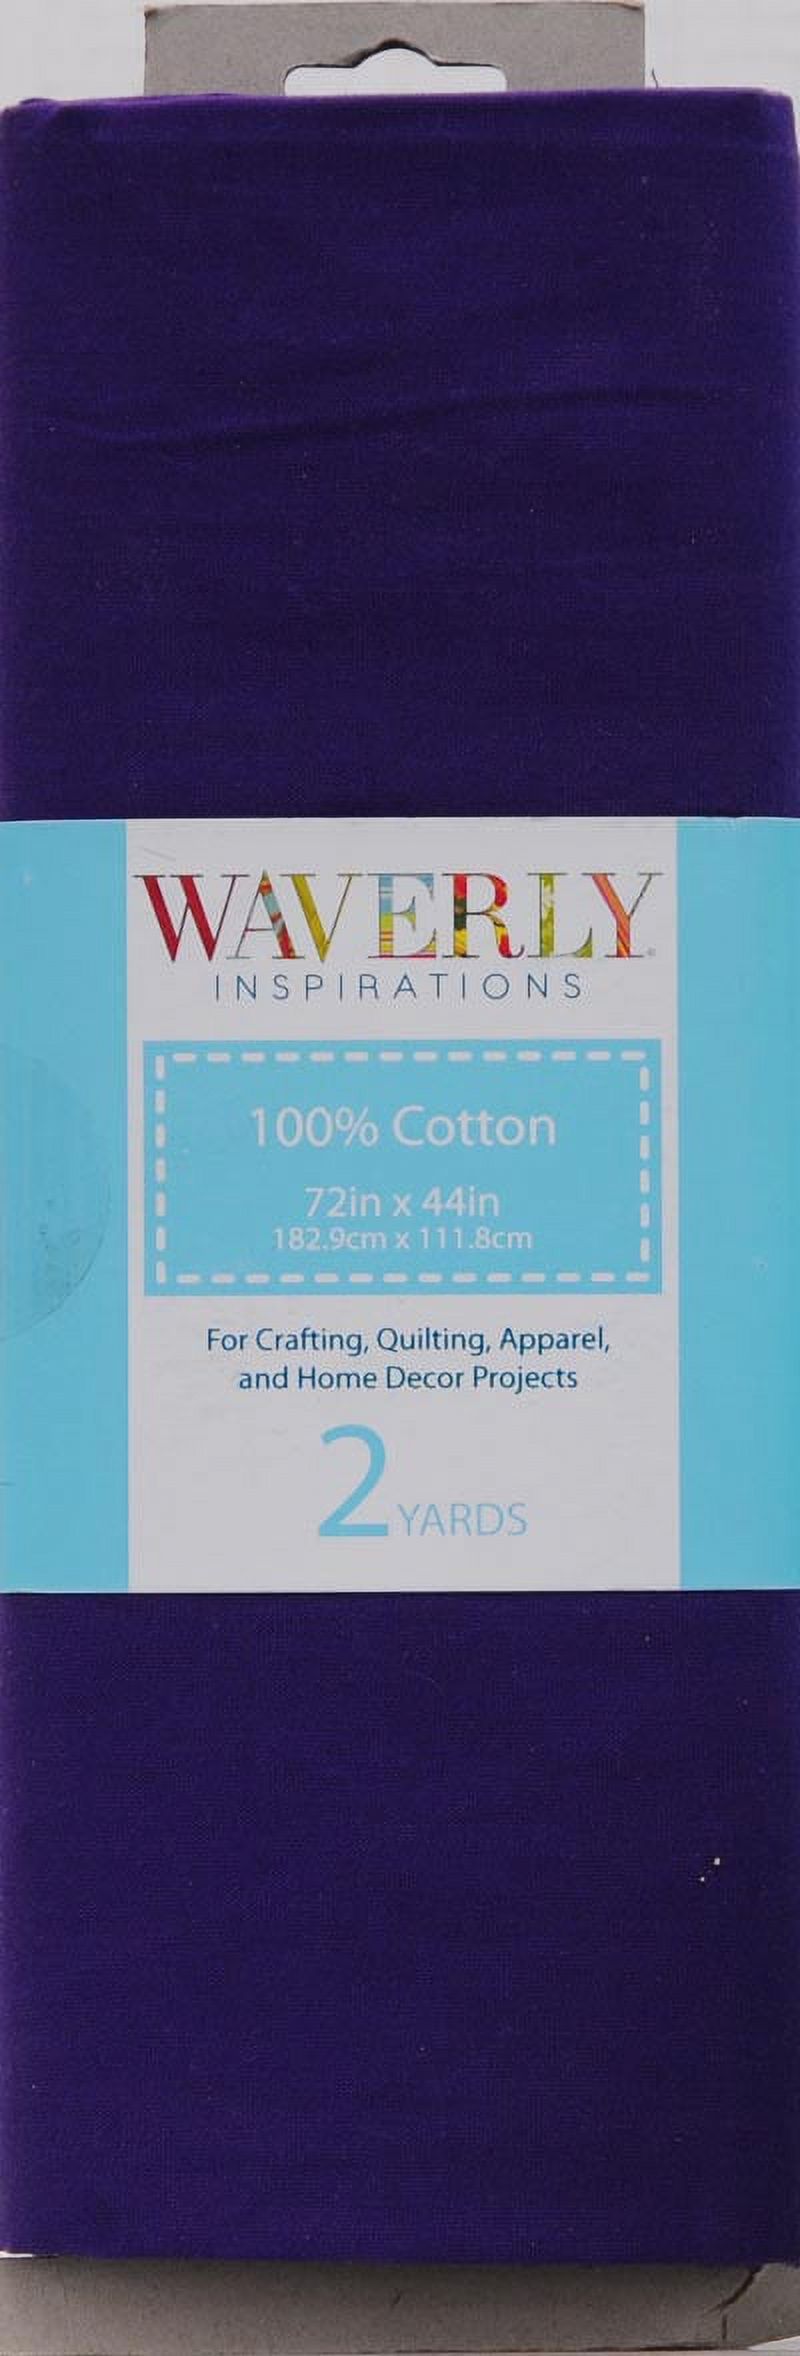 Waverly Inspirations 44" x 2 yd 100% Cotton Sewing & Craft Fabric, Purple - image 2 of 2